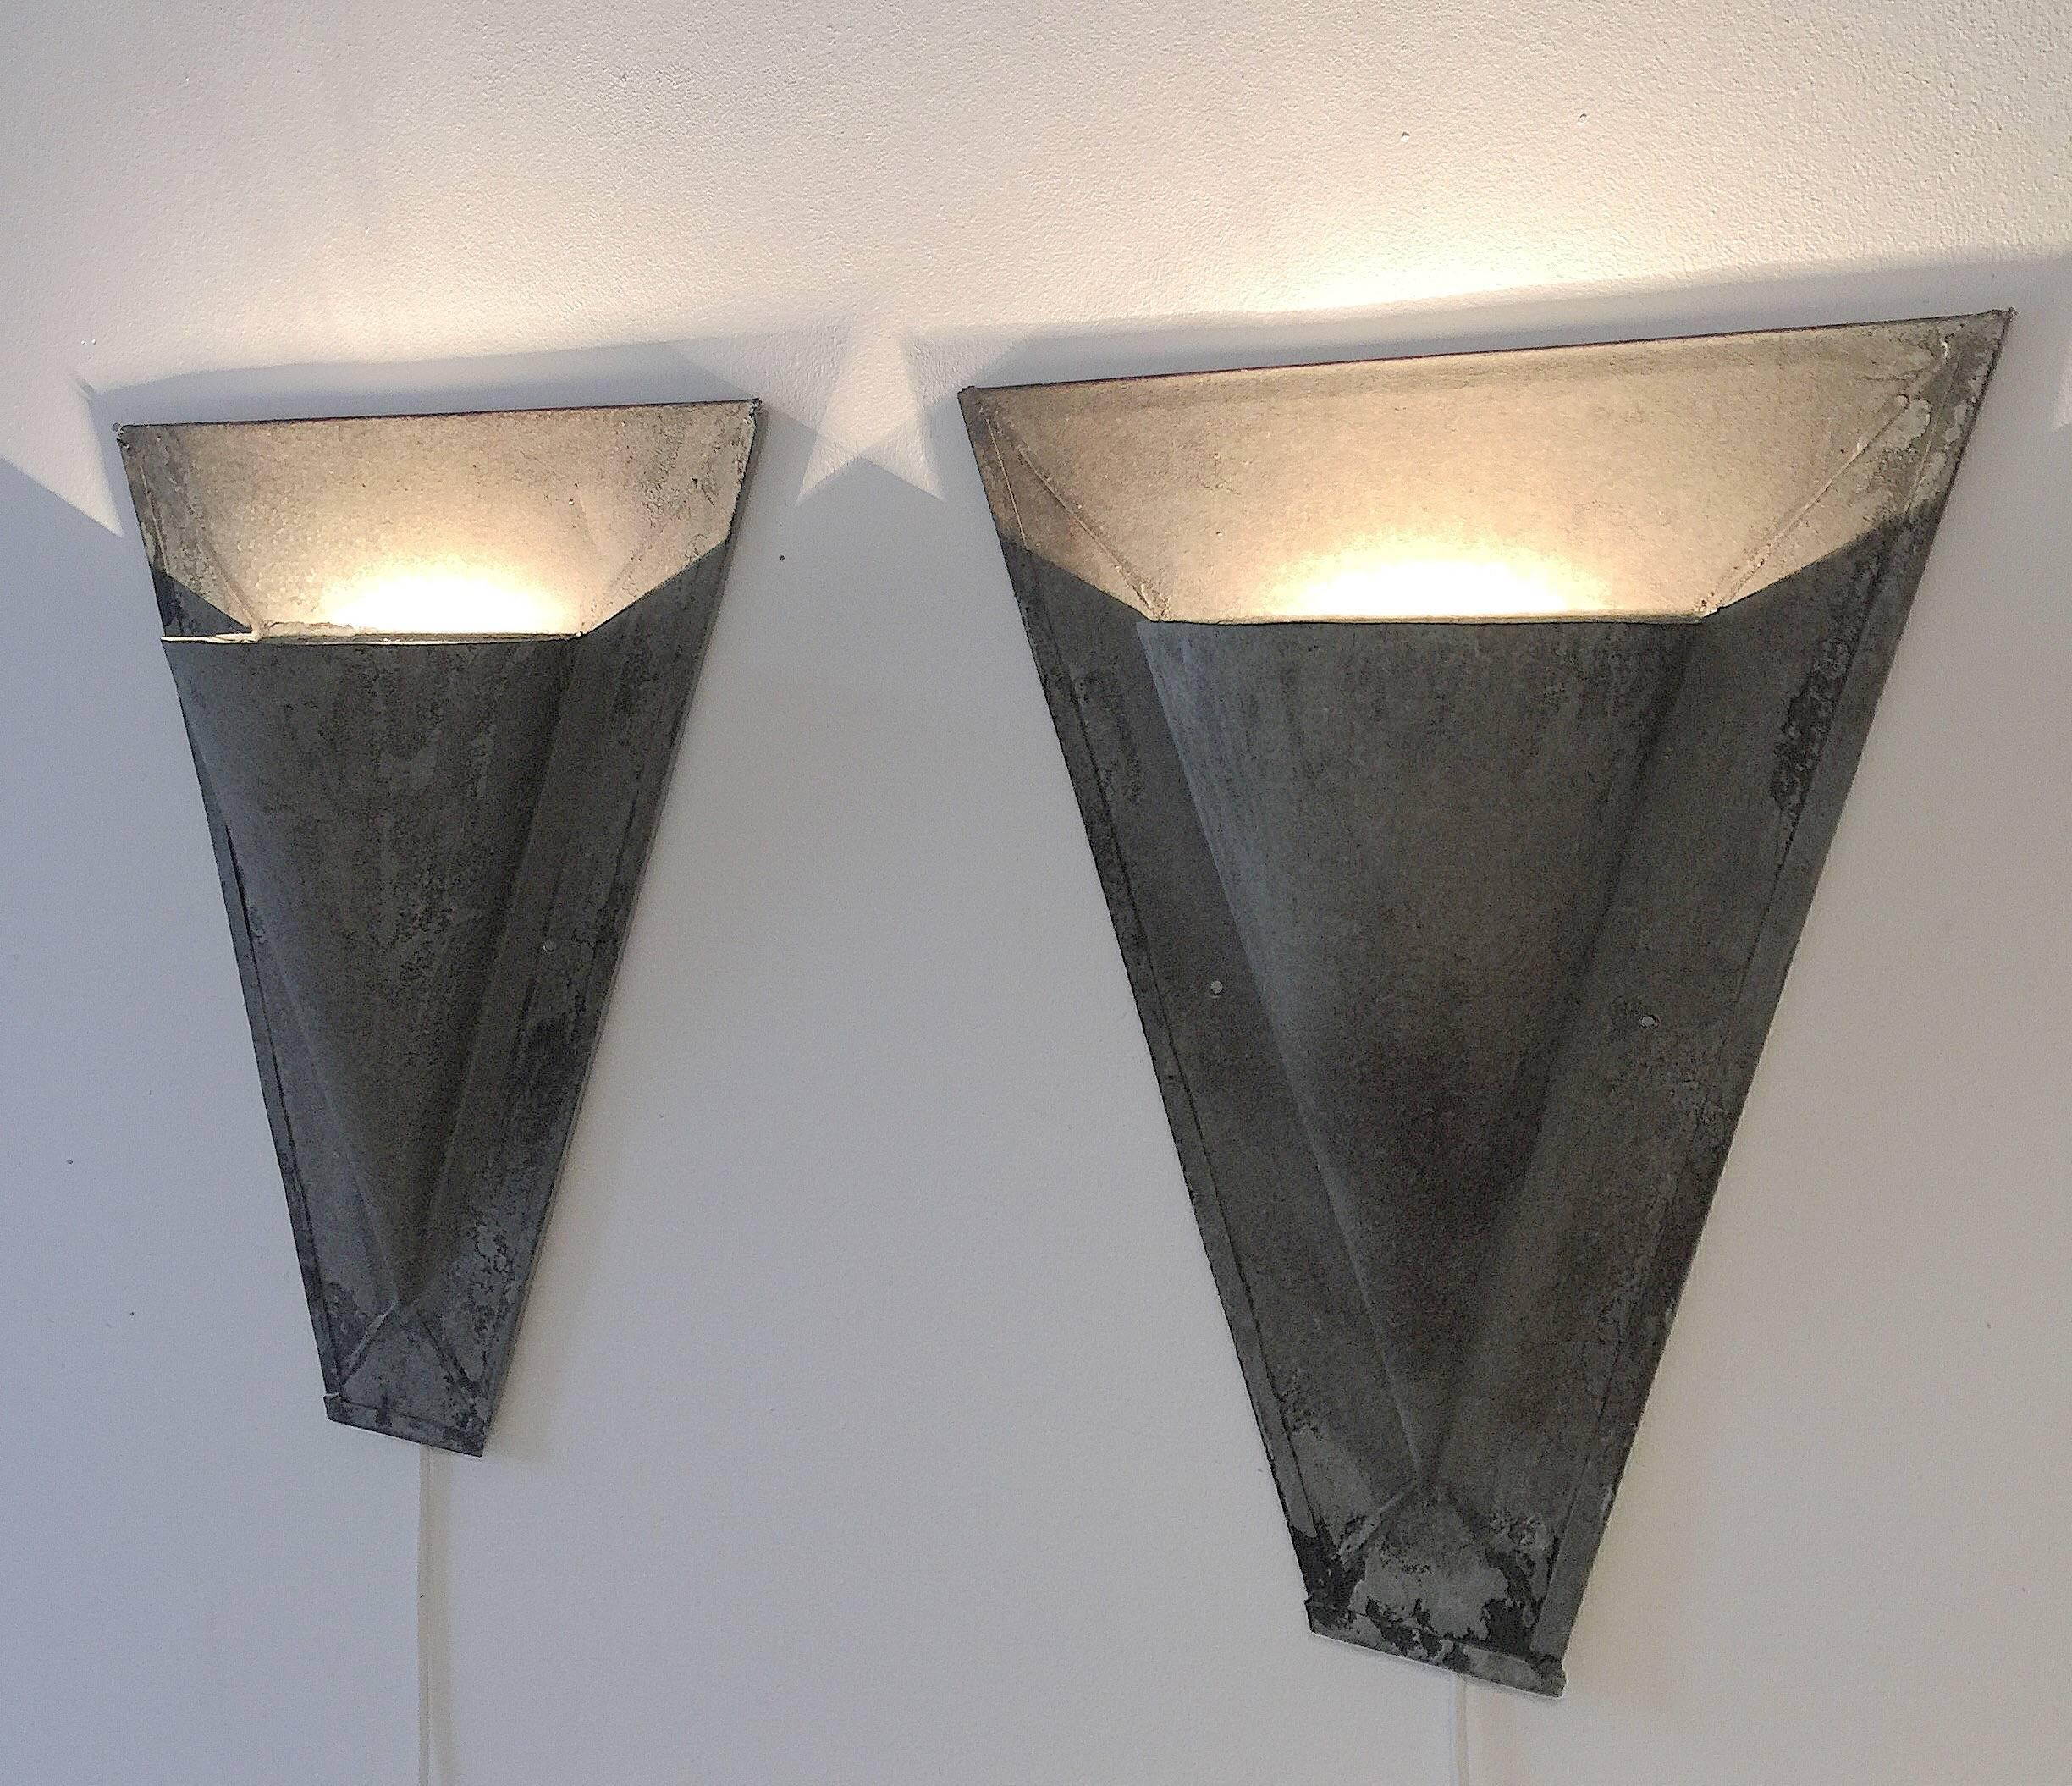 Rustic 19th Century Zinc Galvanised Architectural Uplighters Wall Sconces